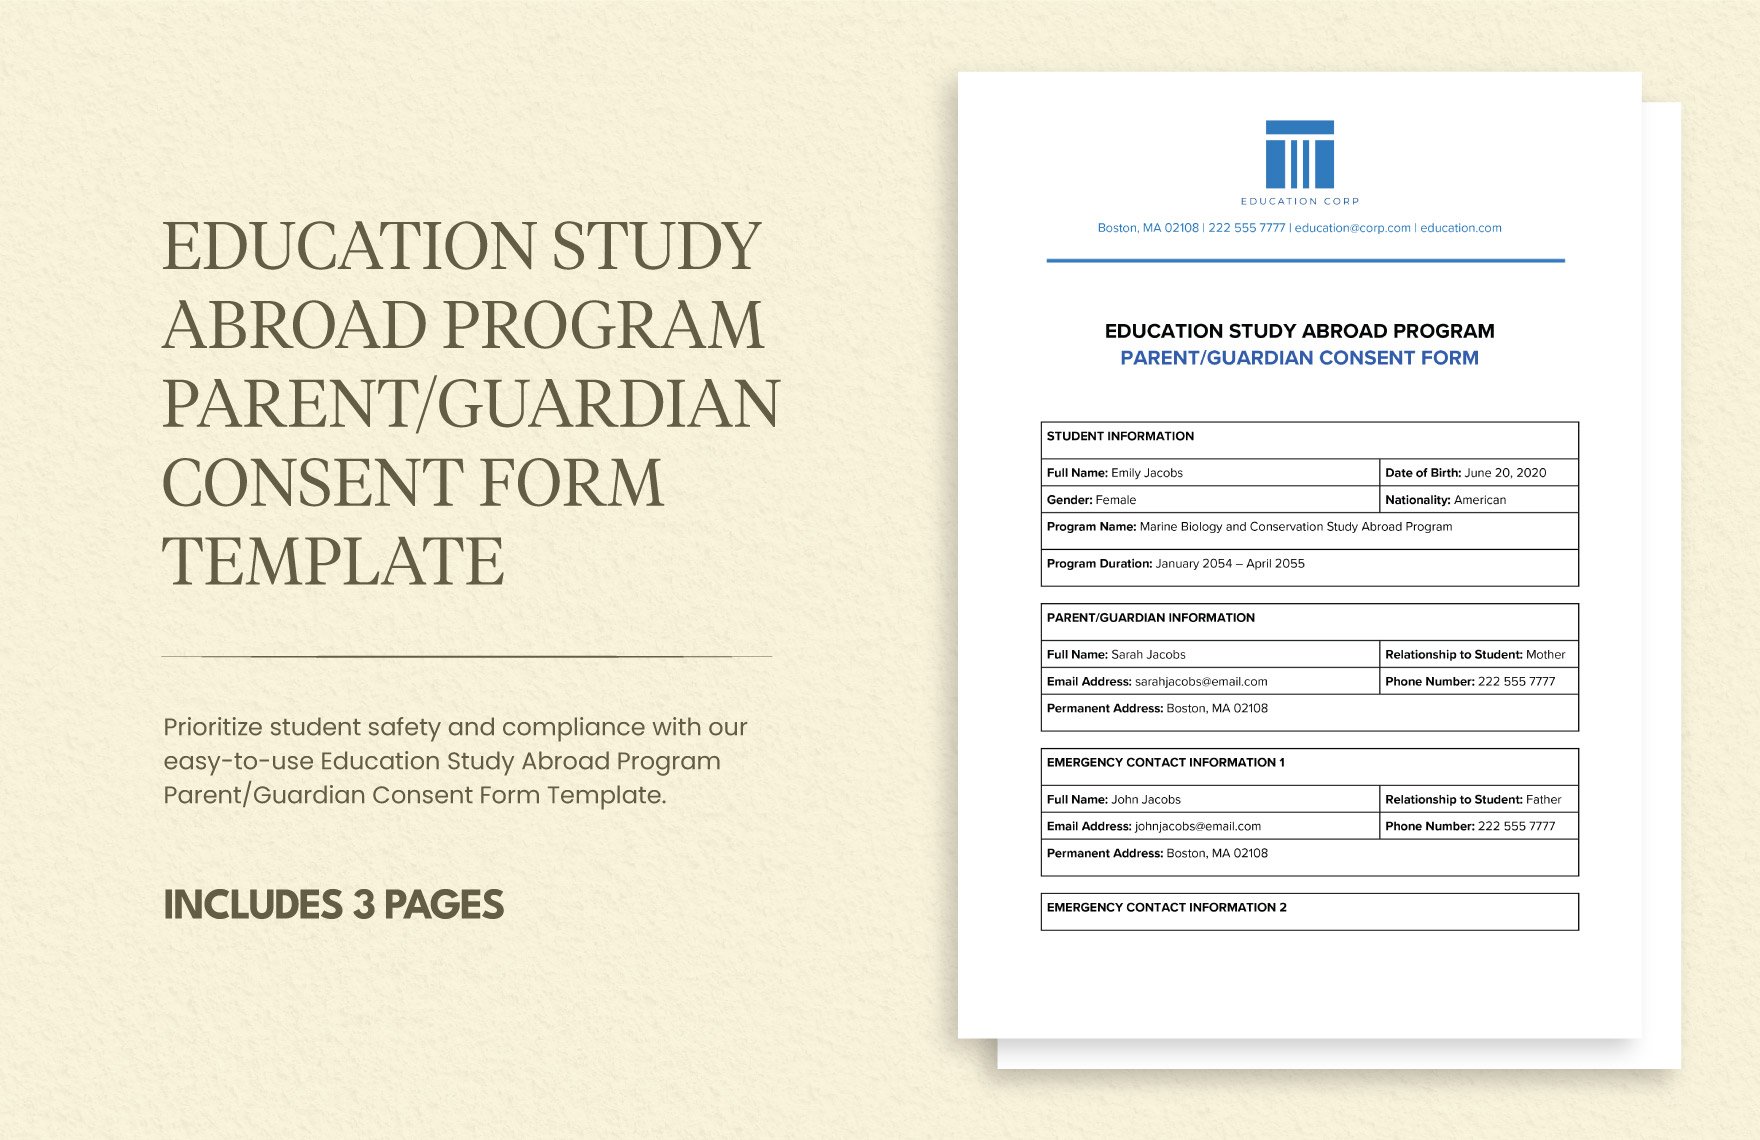 Education Study Abroad Program Parent/Guardian Consent Form Template in